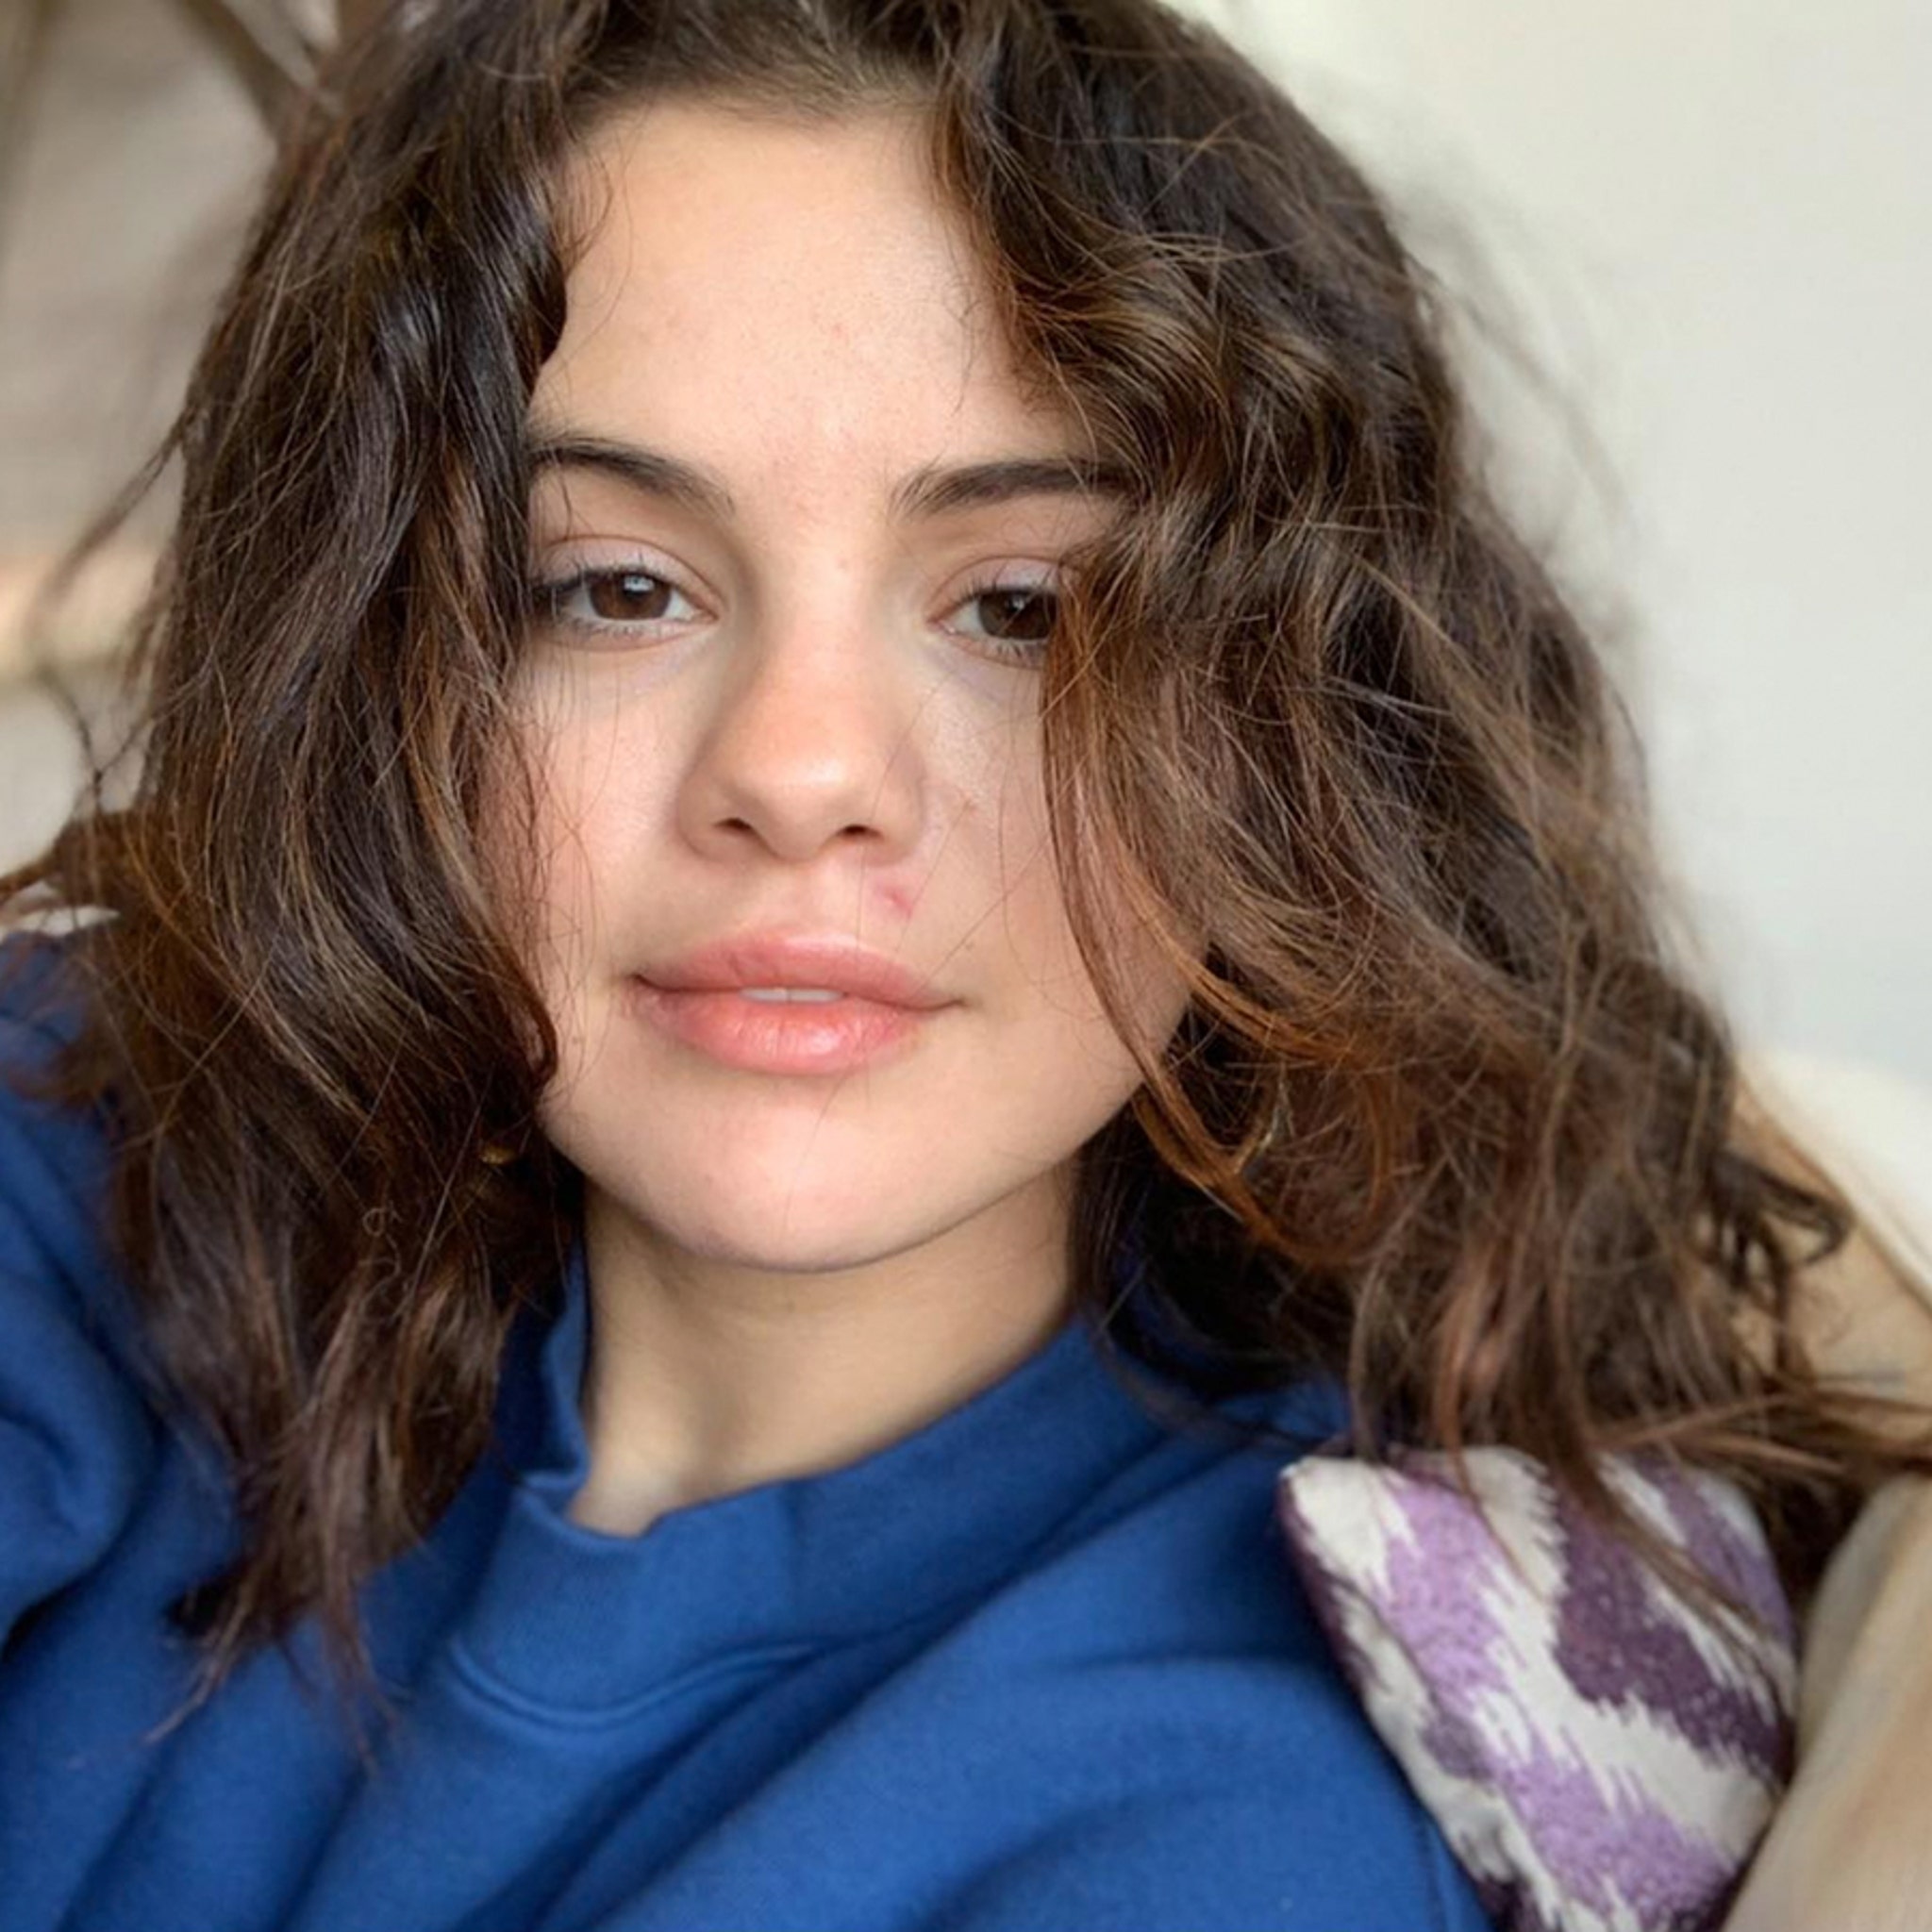 Selena Gomez Shares Unfiltered Photos, Gets Online Support picture